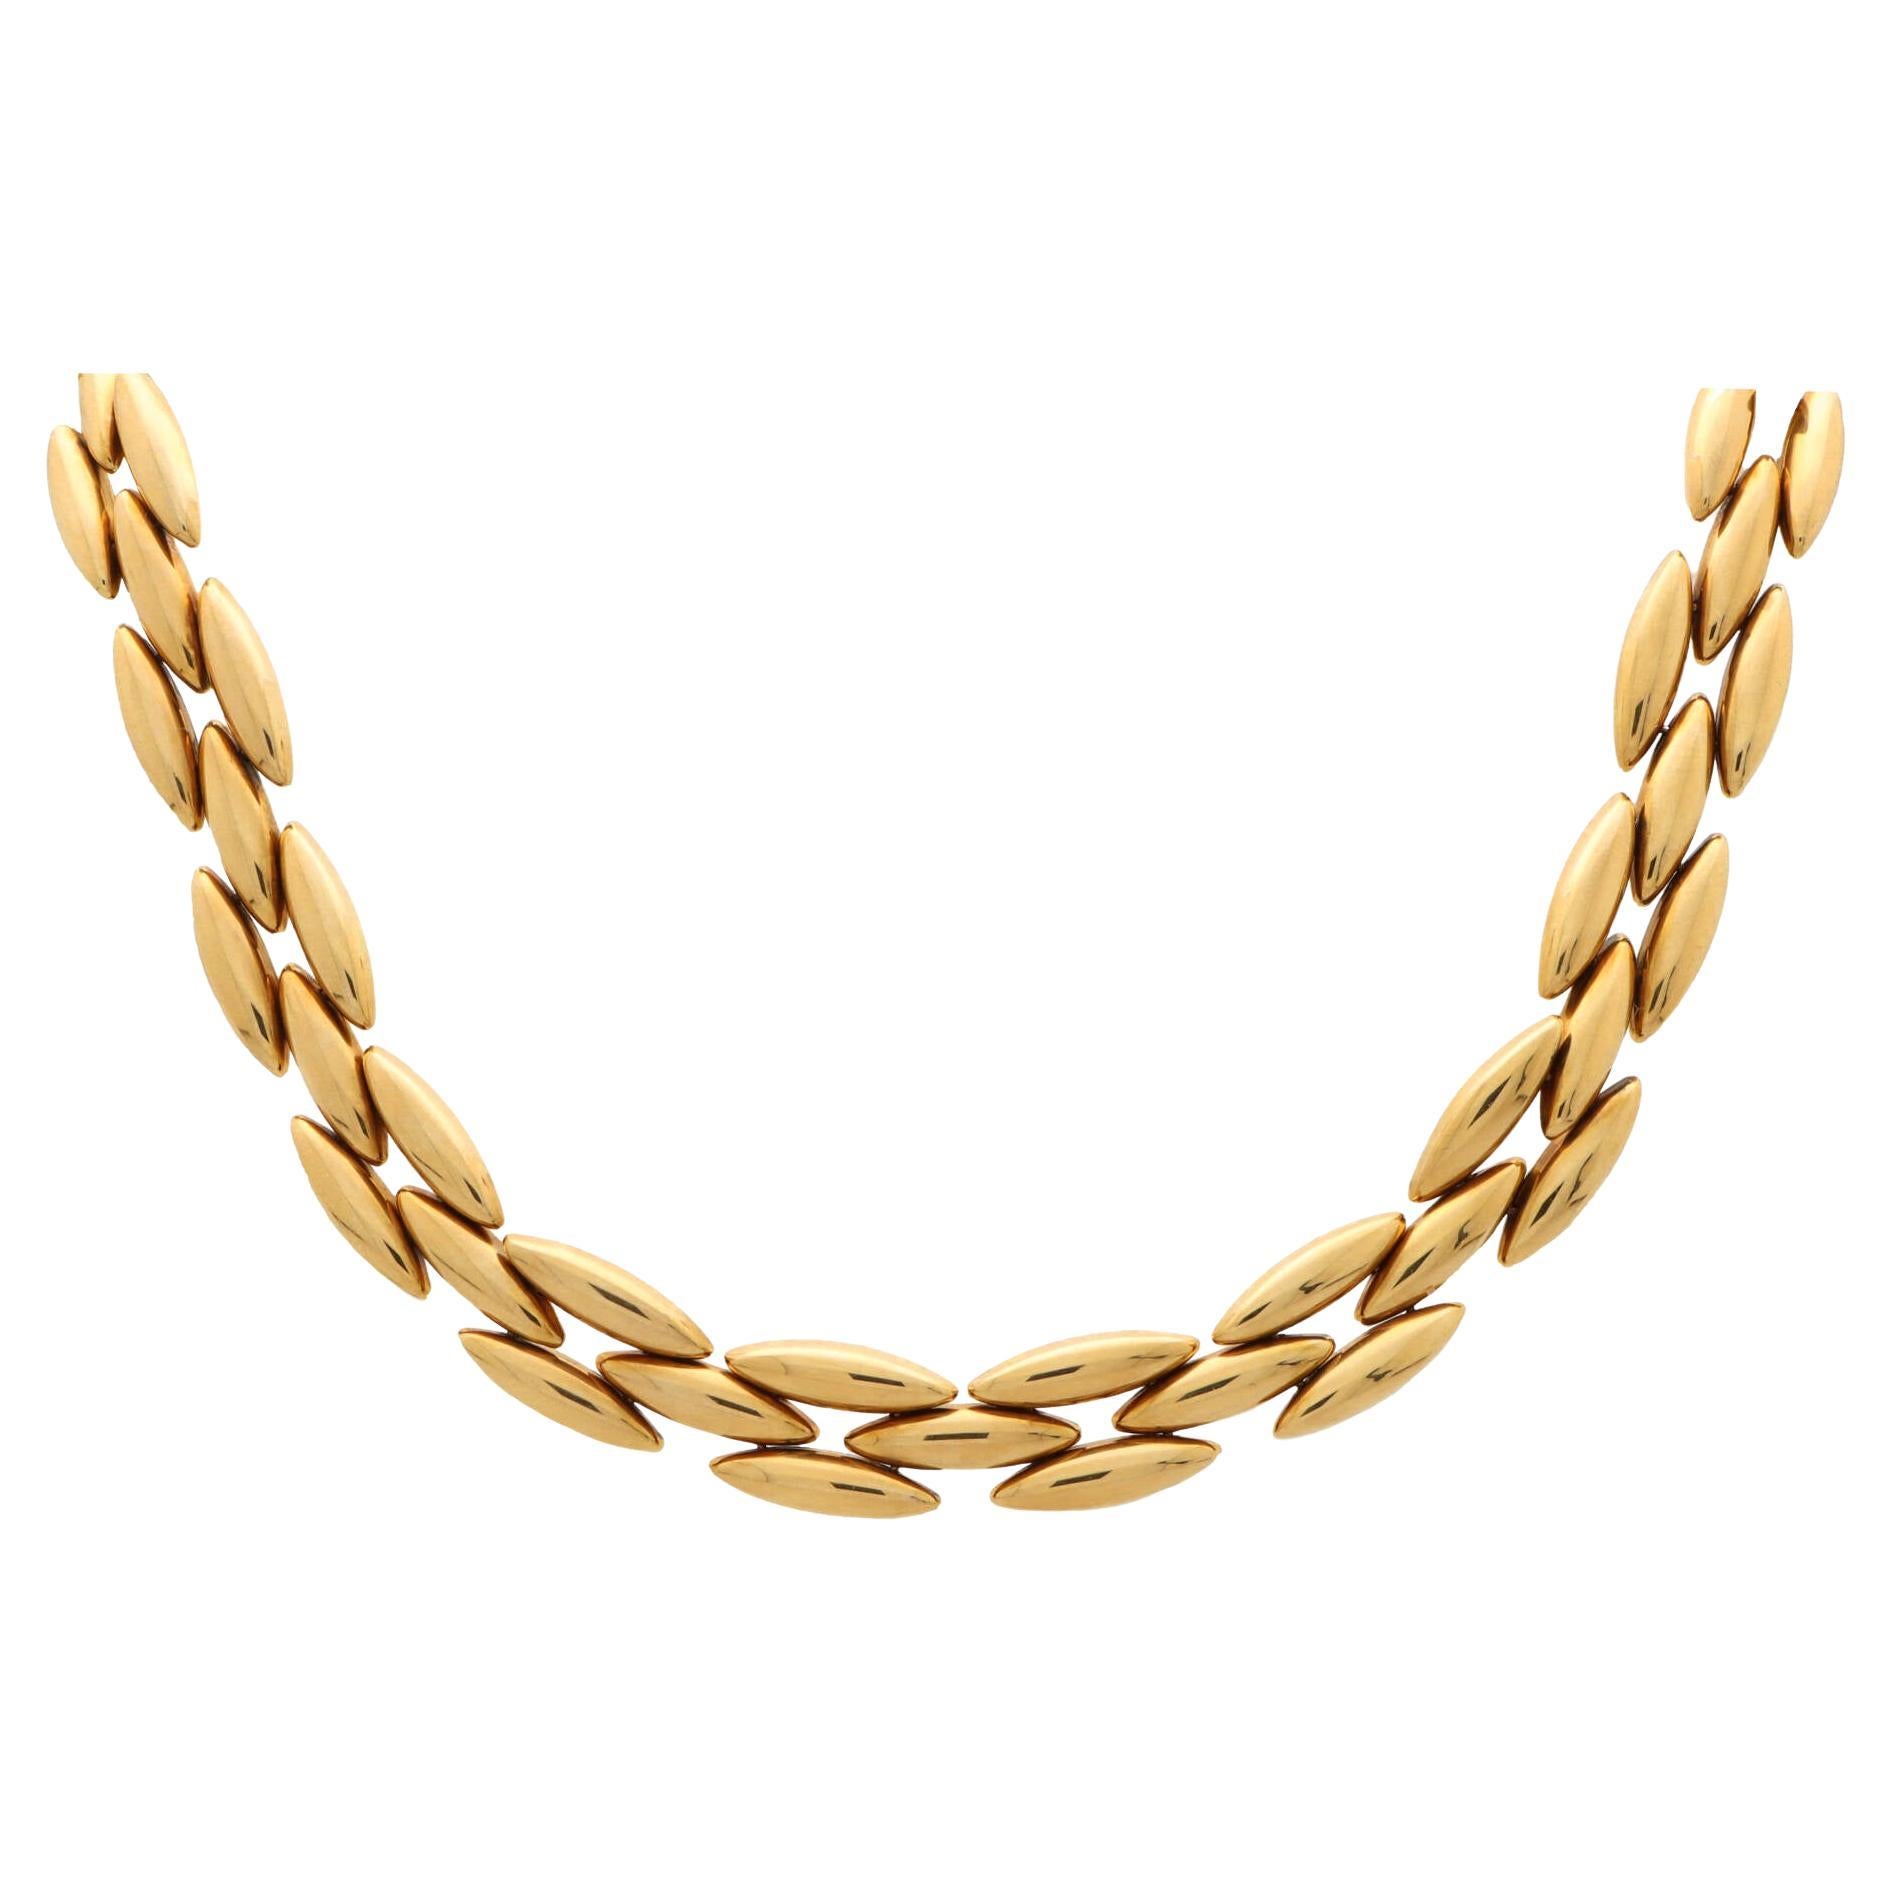 Vintage Cartier 'Gentiane' Oval Link Necklace in 18k Yellow Gold For Sale